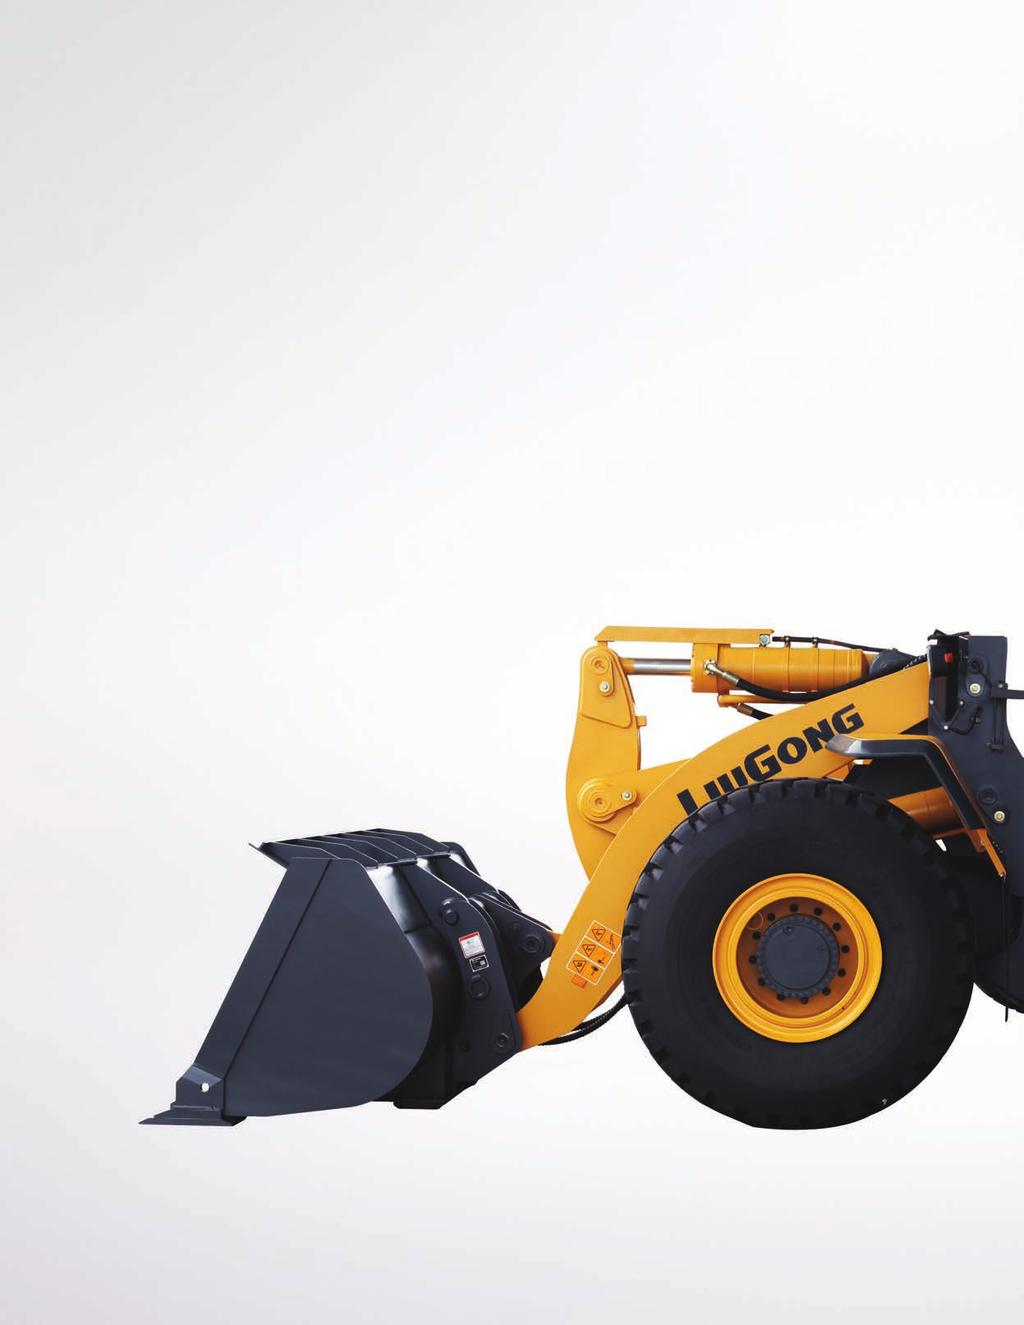 856H WHEEL LOADER MAXIMIZE YOUR RETURN ON INVESTMENT DEPENDABLE POWER Unmatched performance is driven by the Cummins QSB 6.